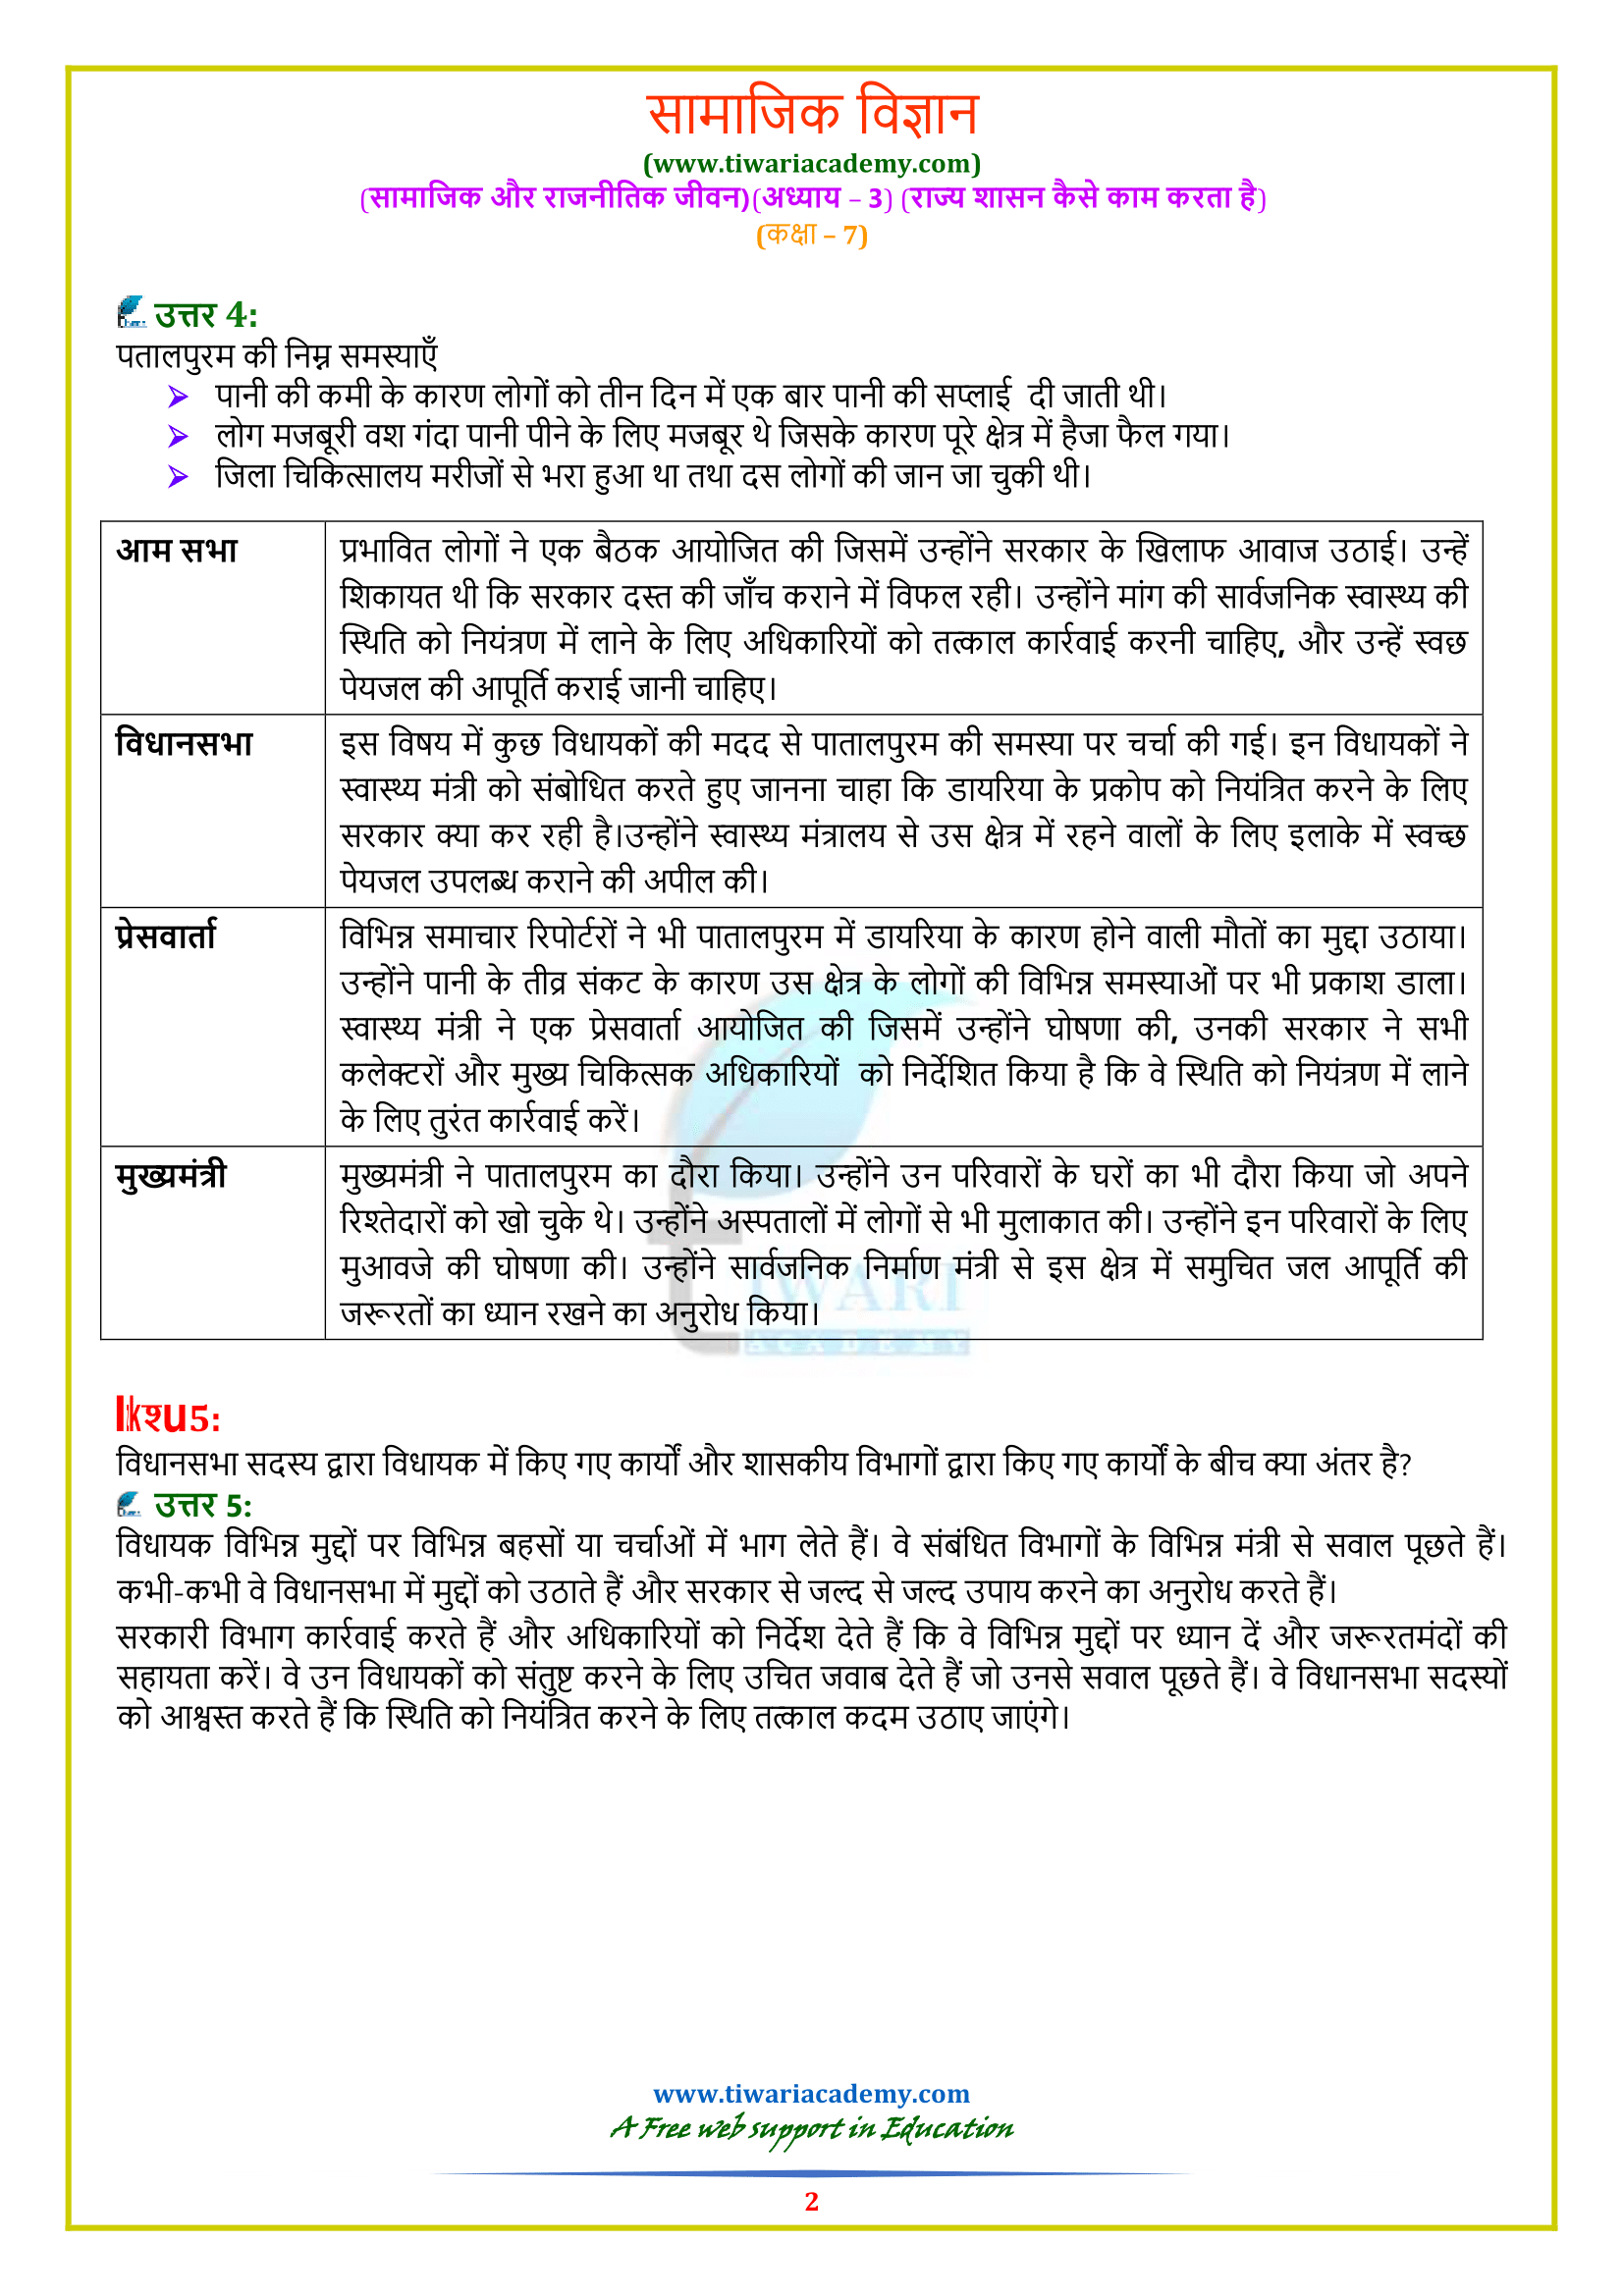 NCERT Solutions for Class 7 Civics in Hindi Medium chapter 3